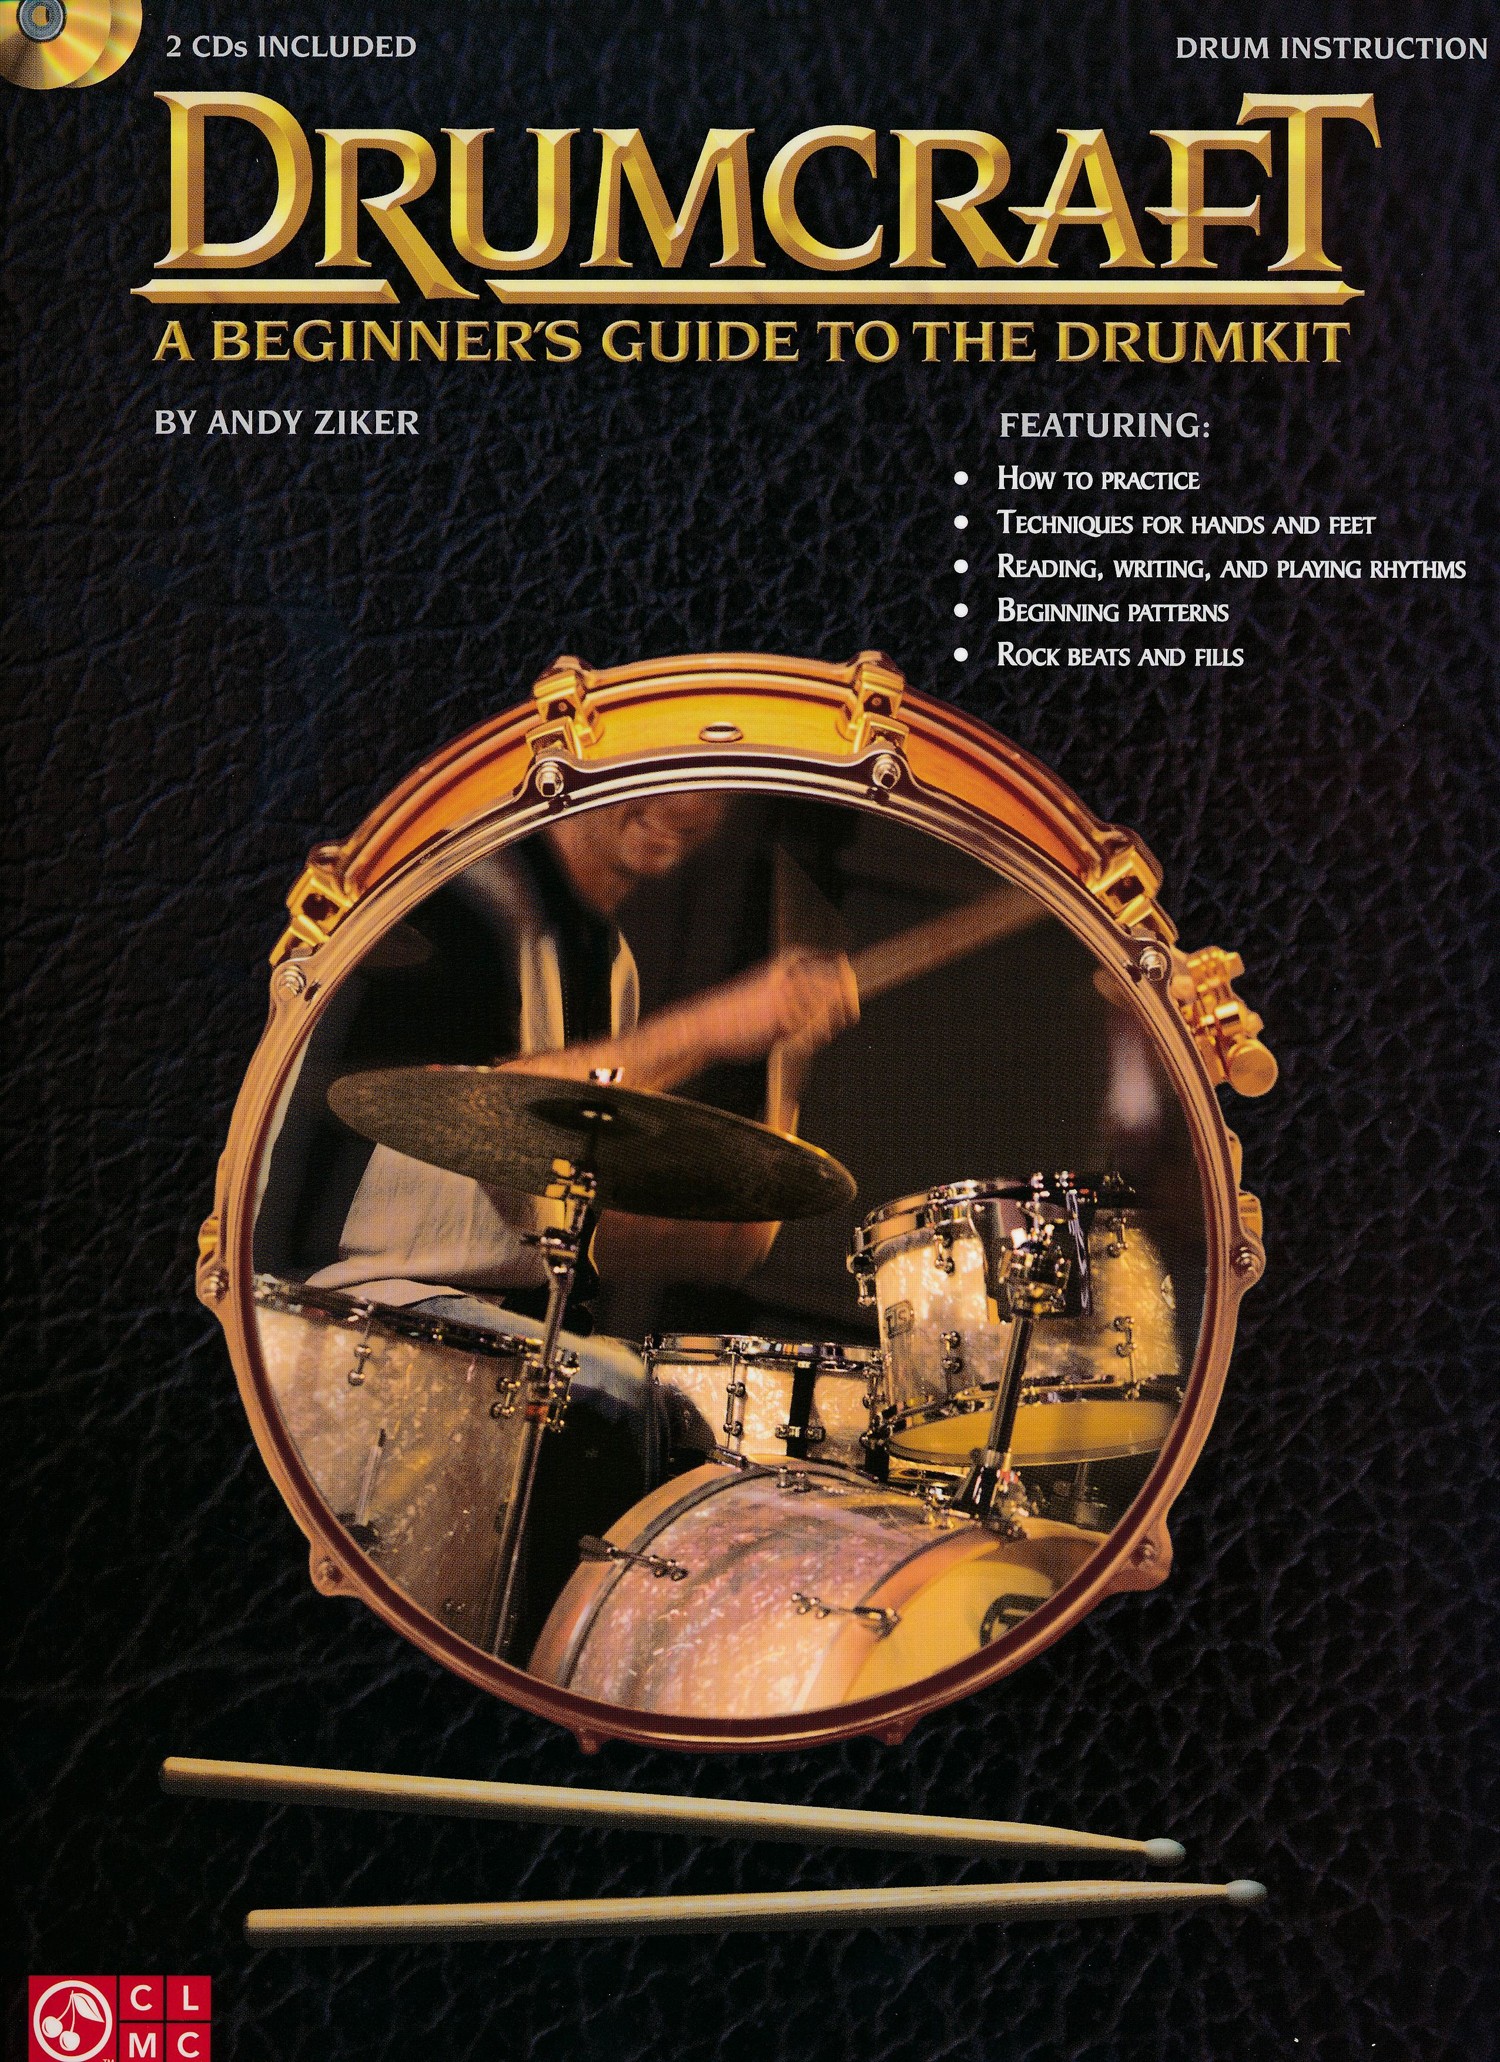 Drumcraft: A Beginner's Guide to The Drum Kit